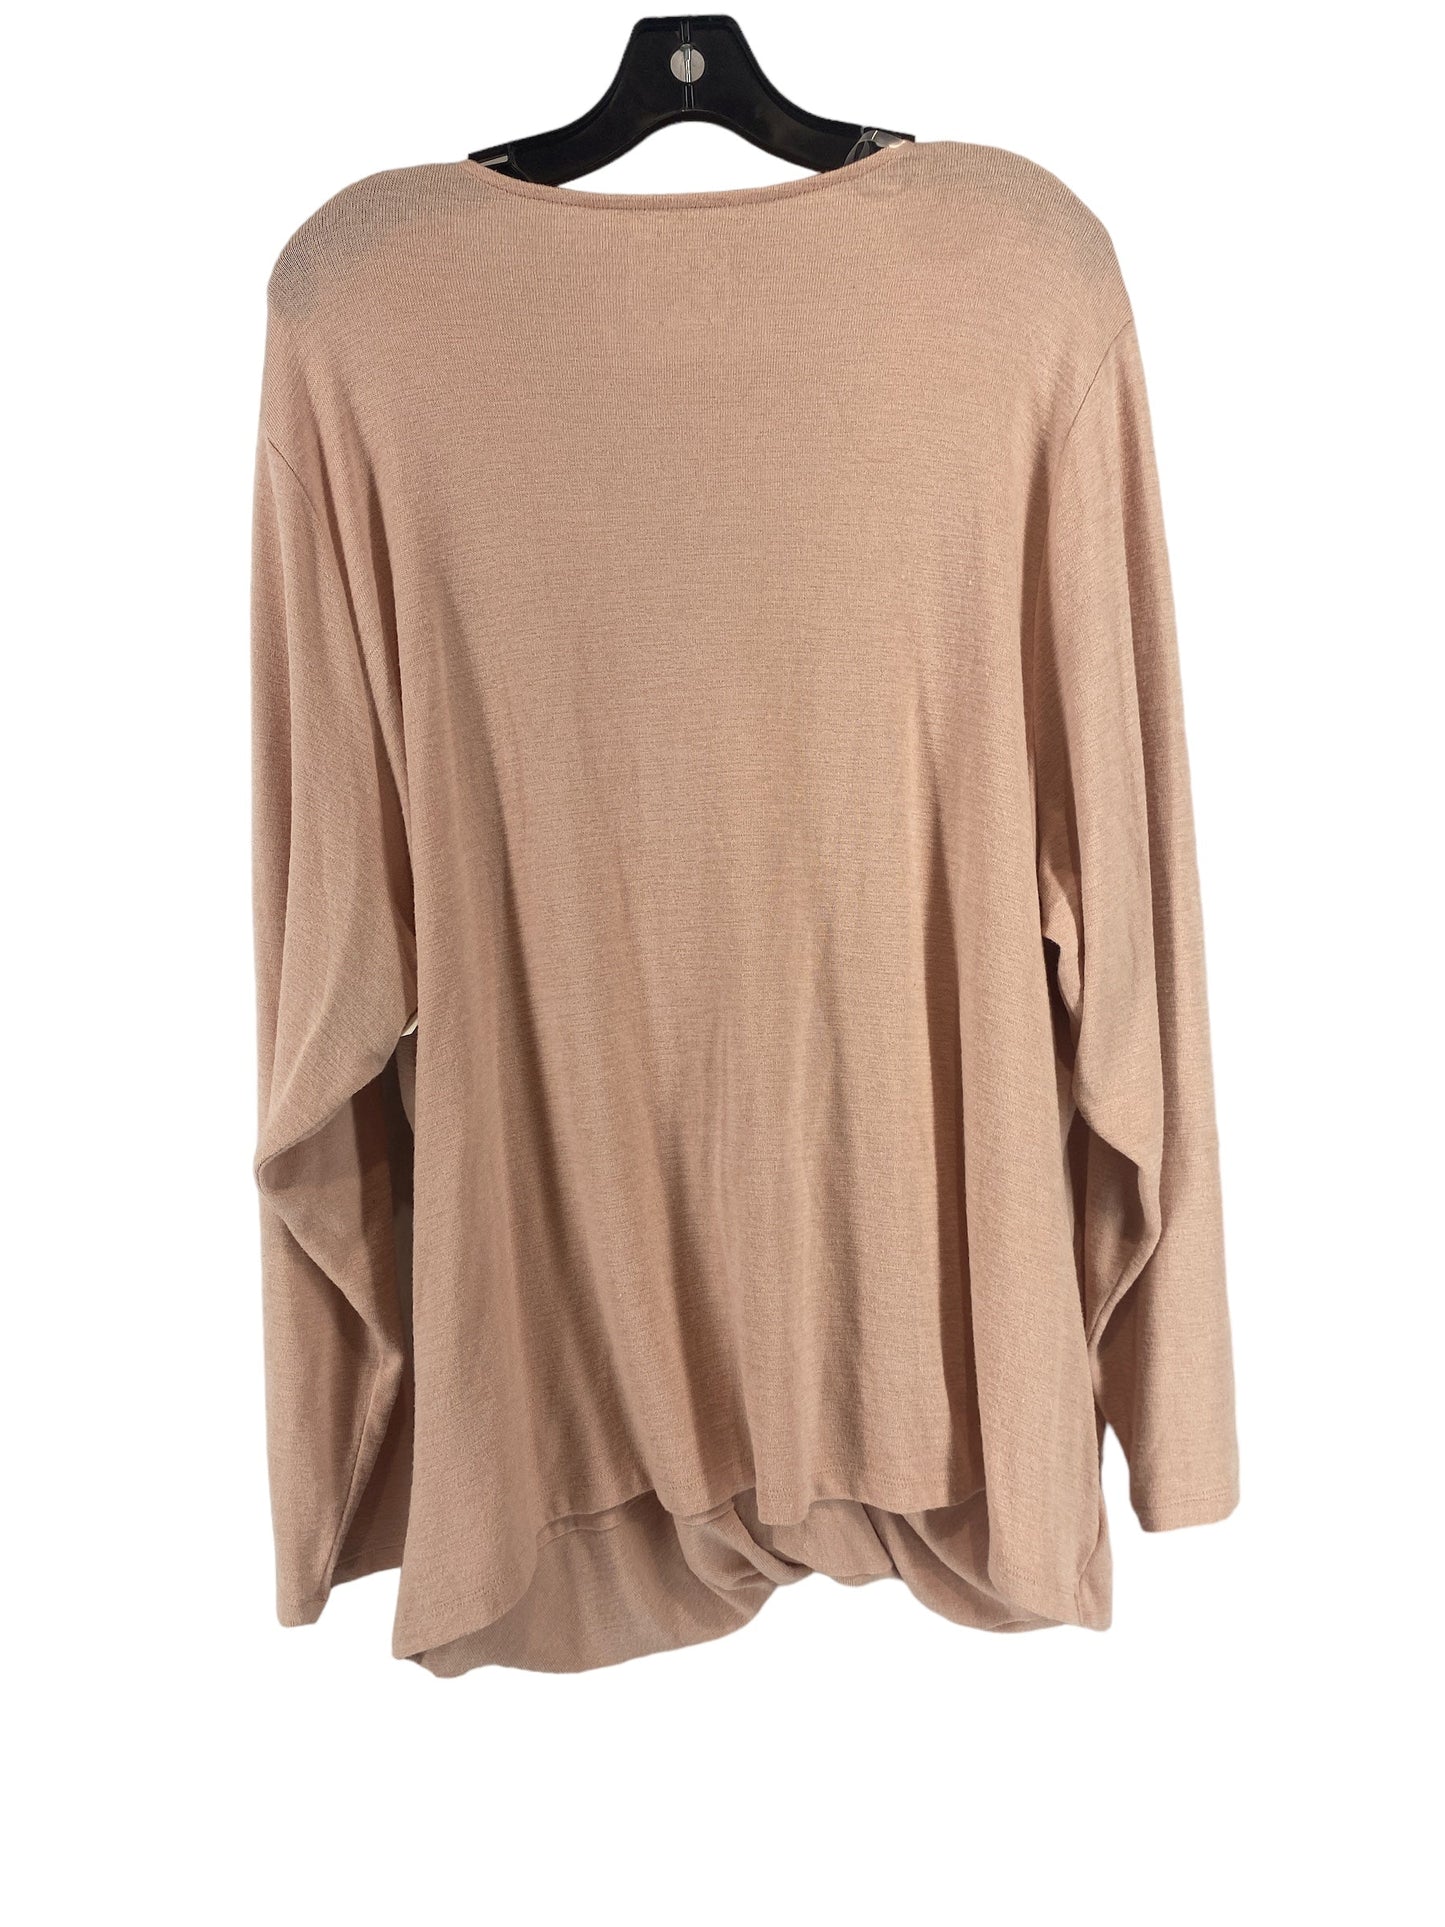 Top Long Sleeve By Stylus  Size: 2x